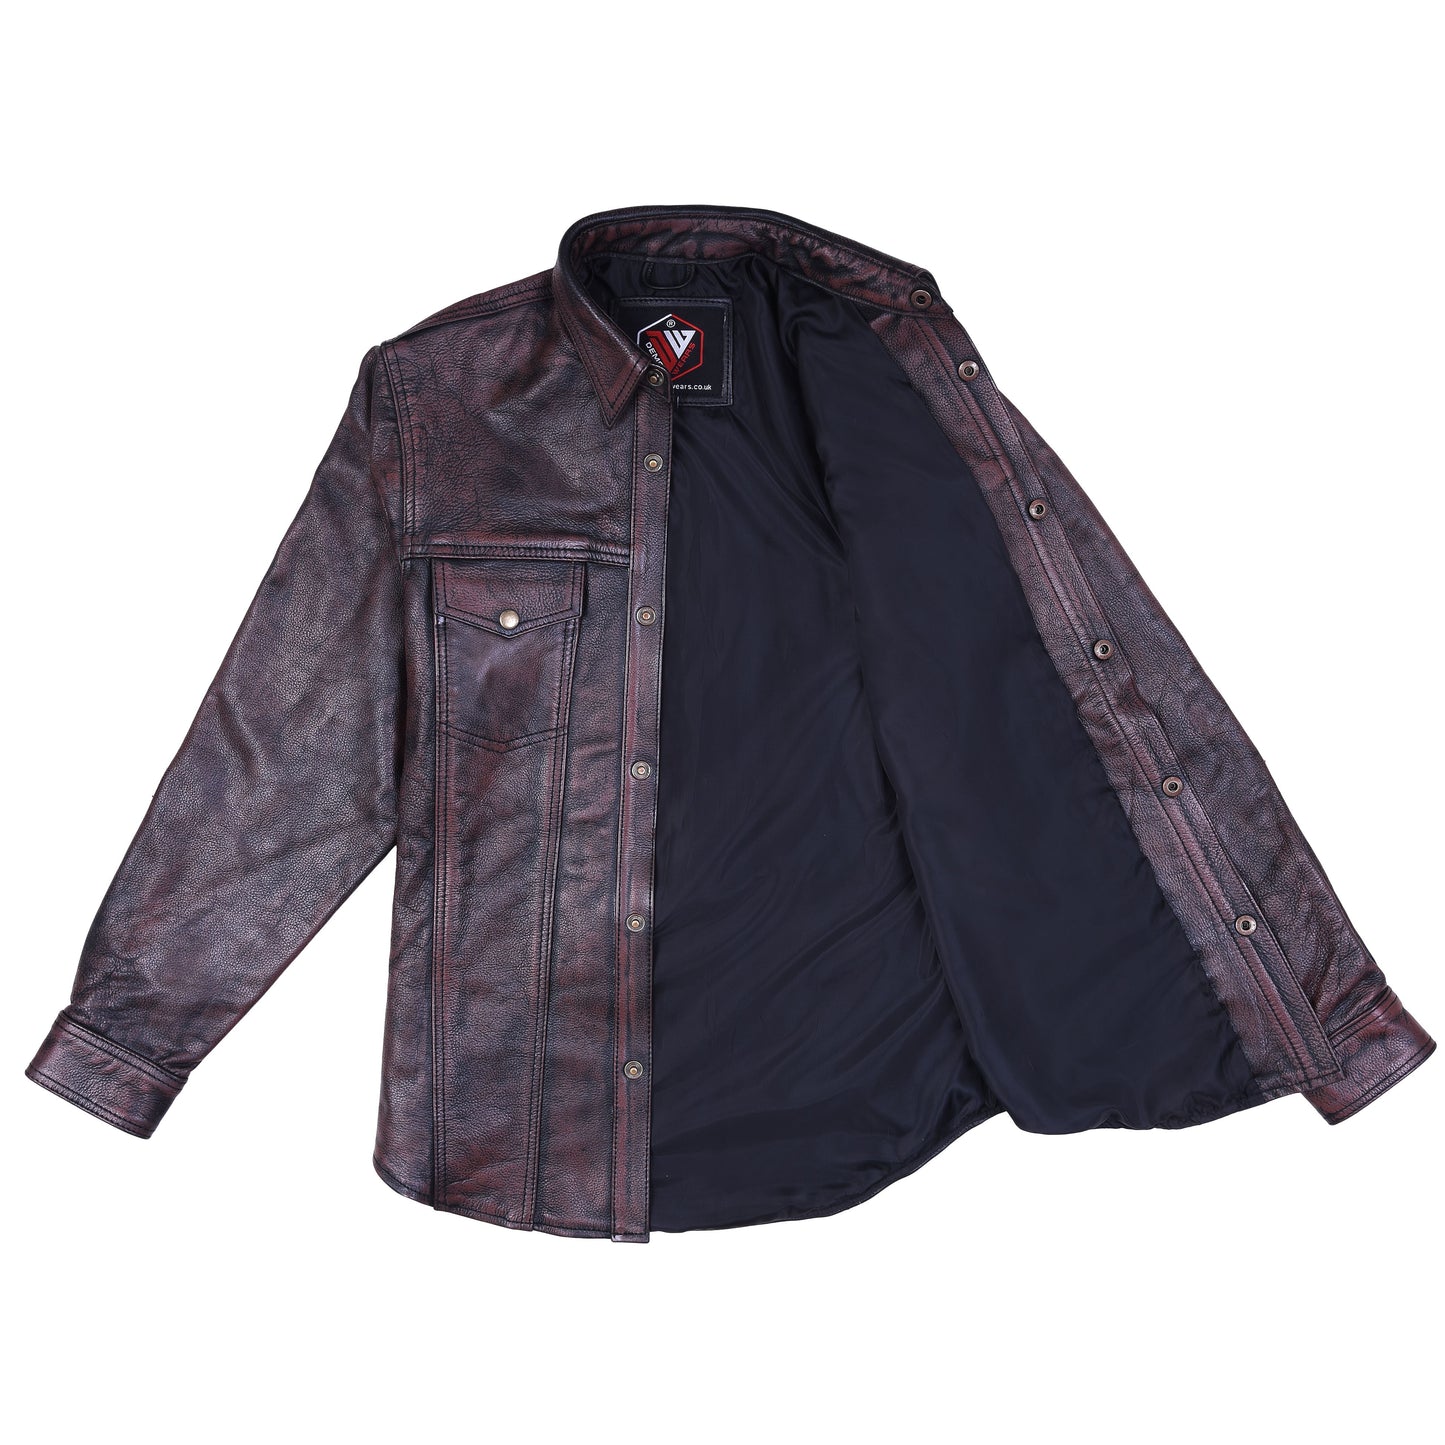 ZAWIAR Premium Leather Button-Down Shirt for Men - Full Sleeve Style for a Polished Look